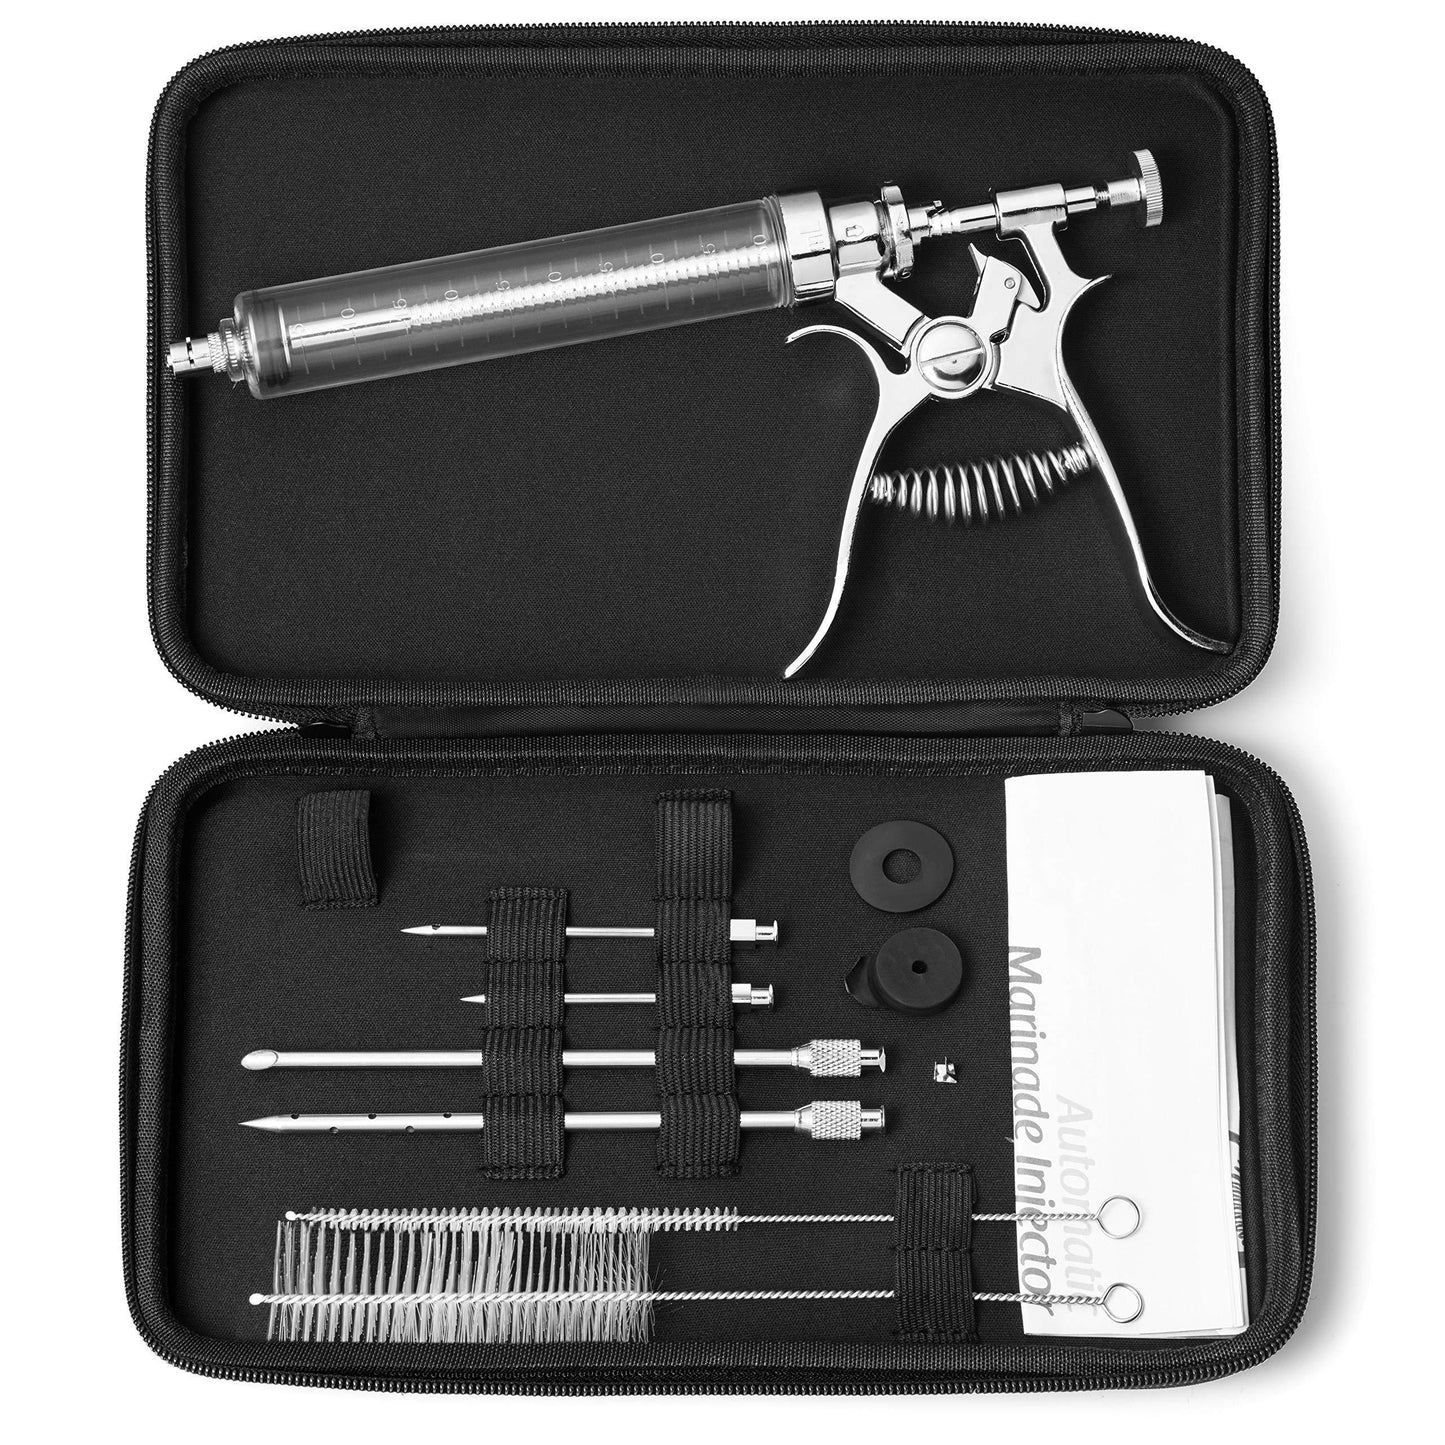 J&B Goods Professional Automatic BBQ Meat Marinade Injector Gun Kit with Case, 2 oz Large Capacity Barrel and 4 Commercial Grade Marinade Needles. - CookCave